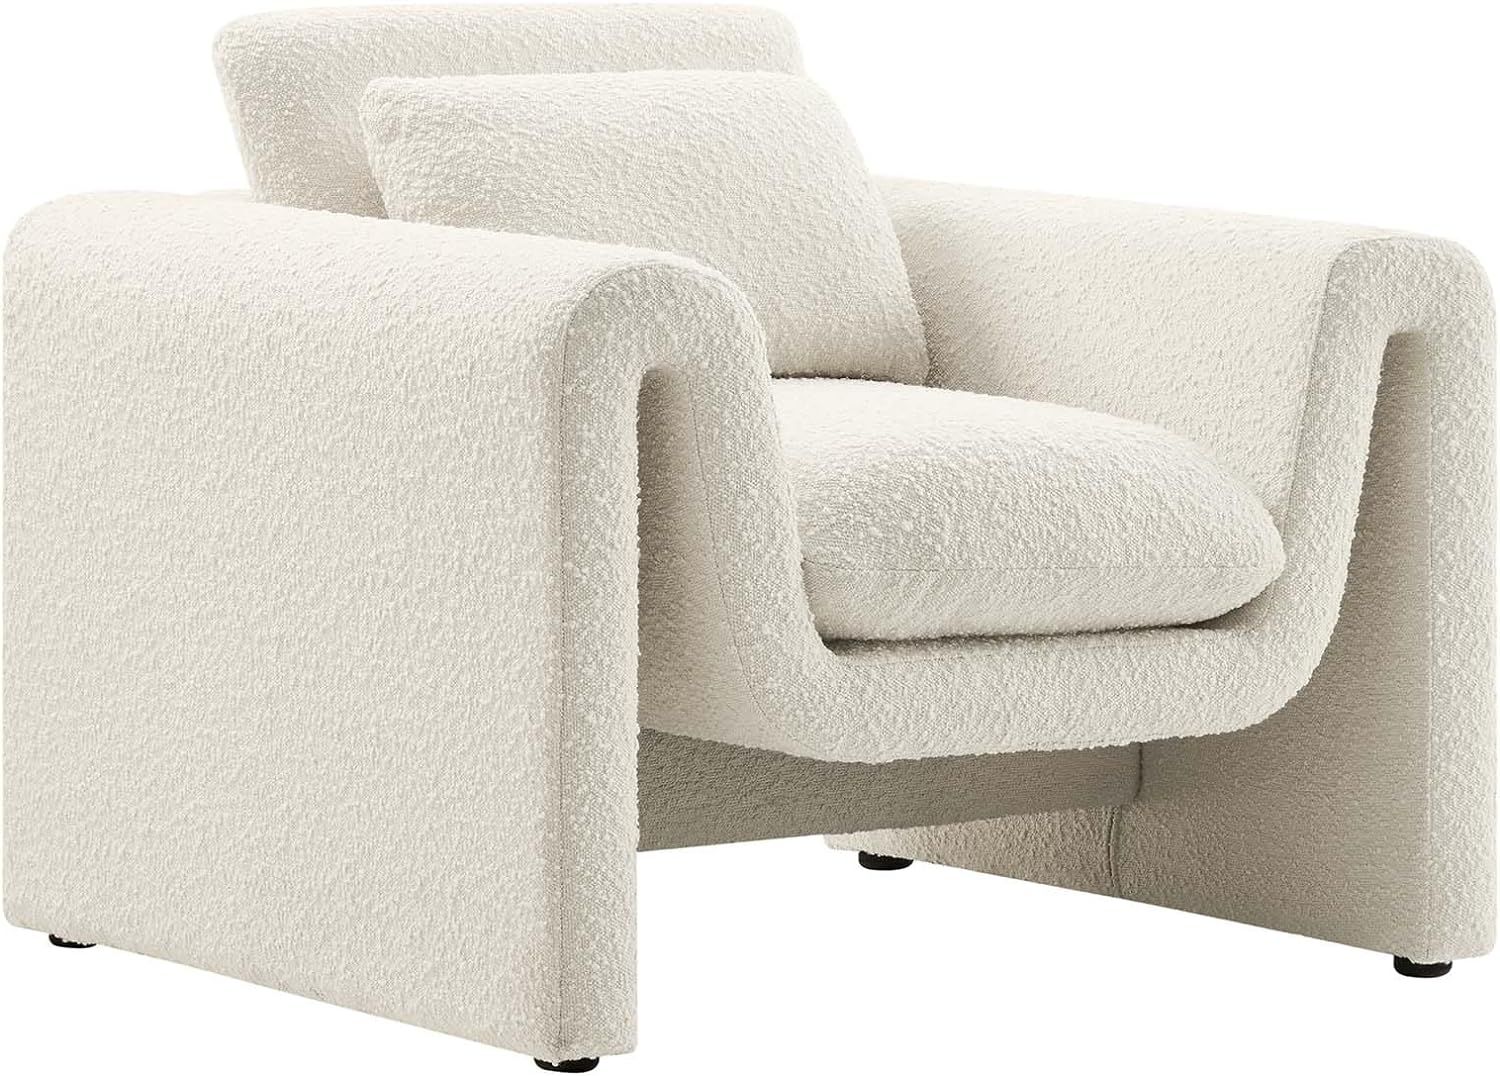 Modway Waverly Boucle Fabric Living Room Accent Armchair in Ivory-Unique Wavy Design | Amazon (US)